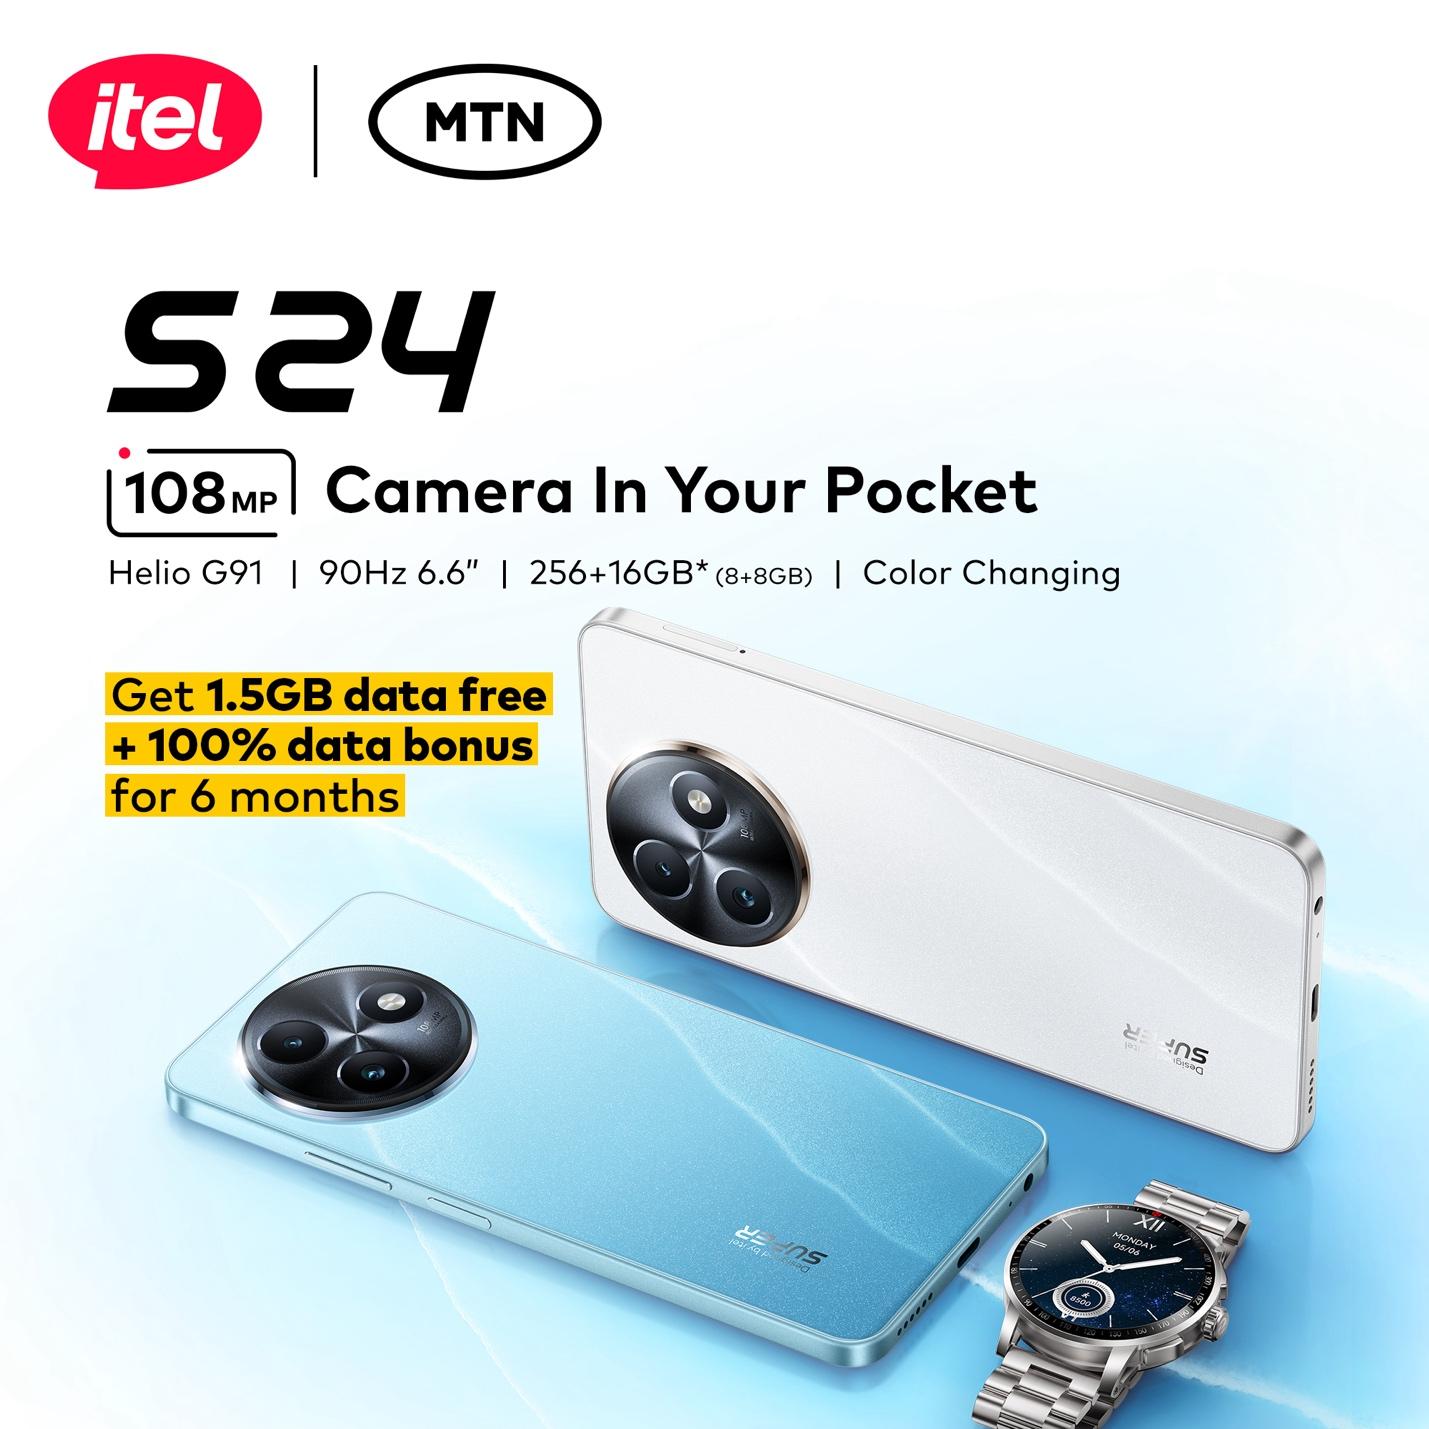 108MP Camera In Your Pocket: itel Launches New S24 Smartphone In Nigeria With MTN.